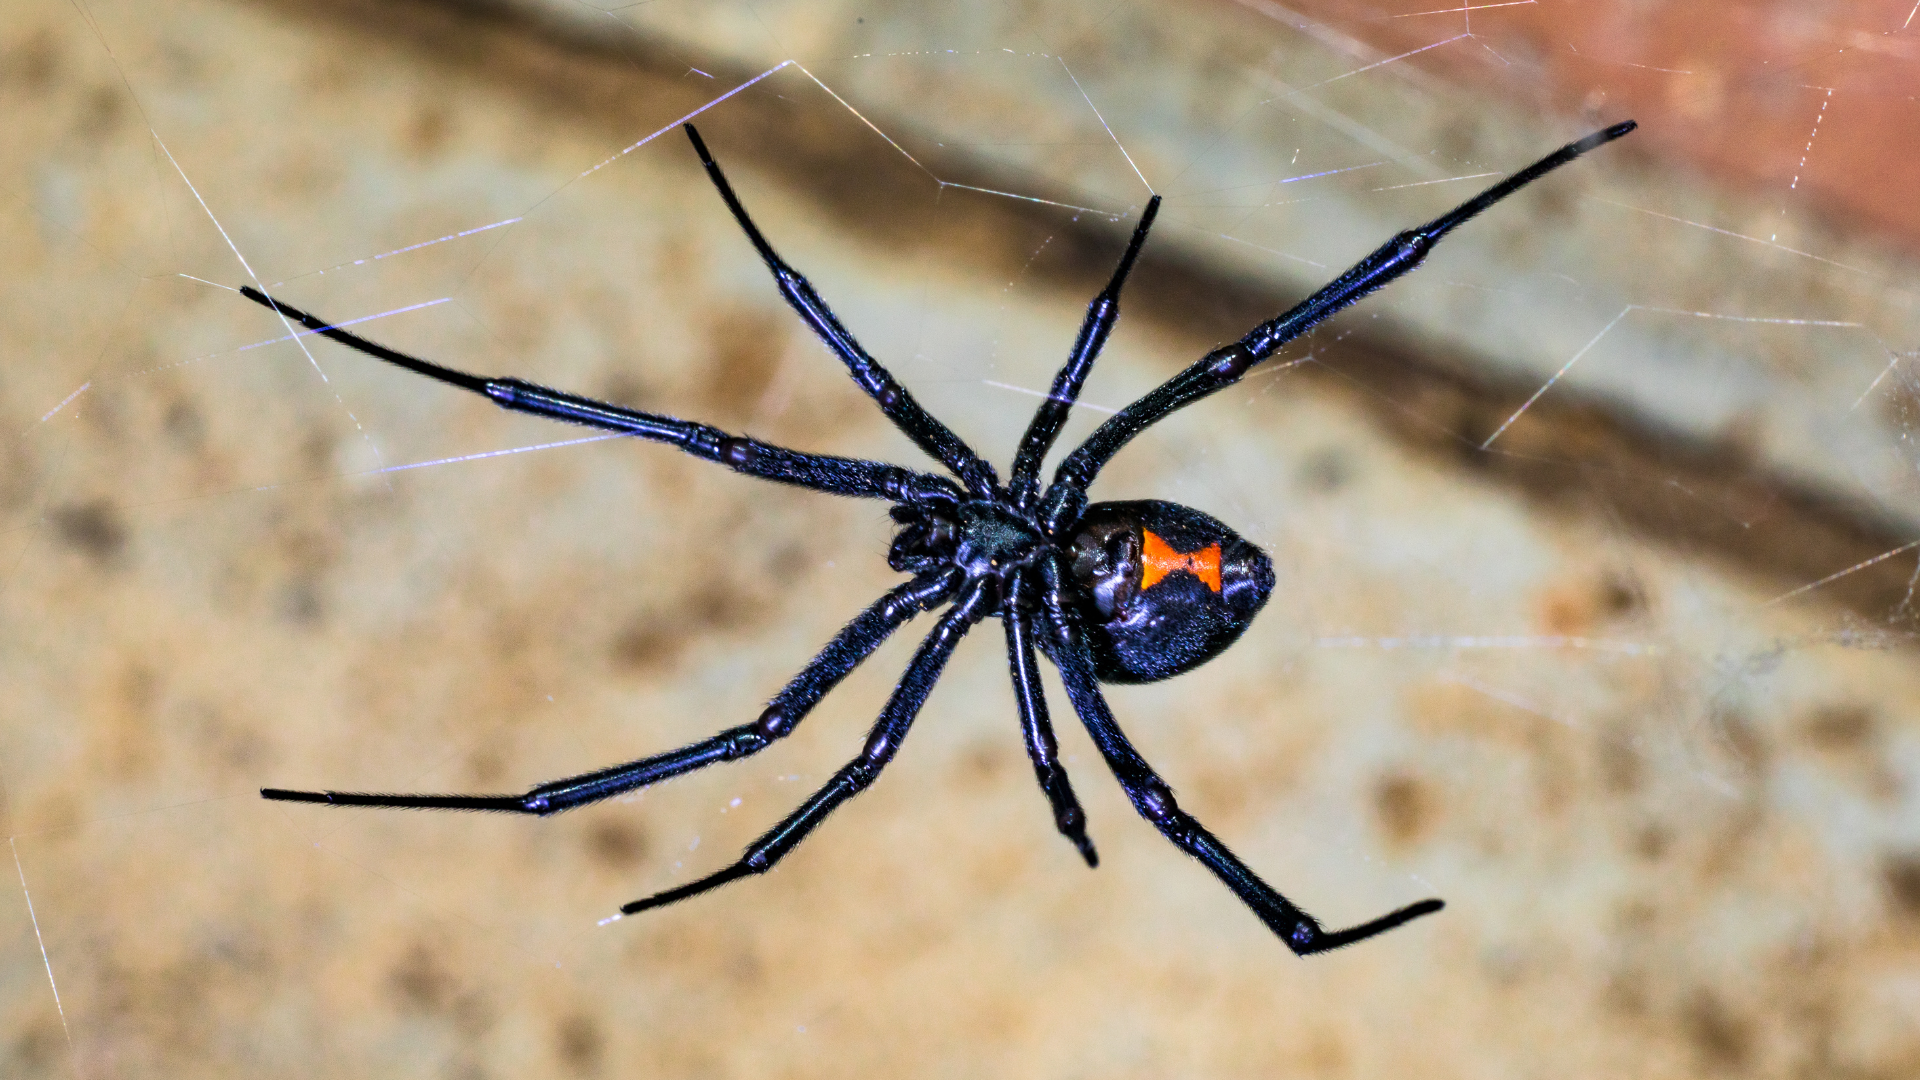 Maryland lies right in the middle of the black widow’s habitat